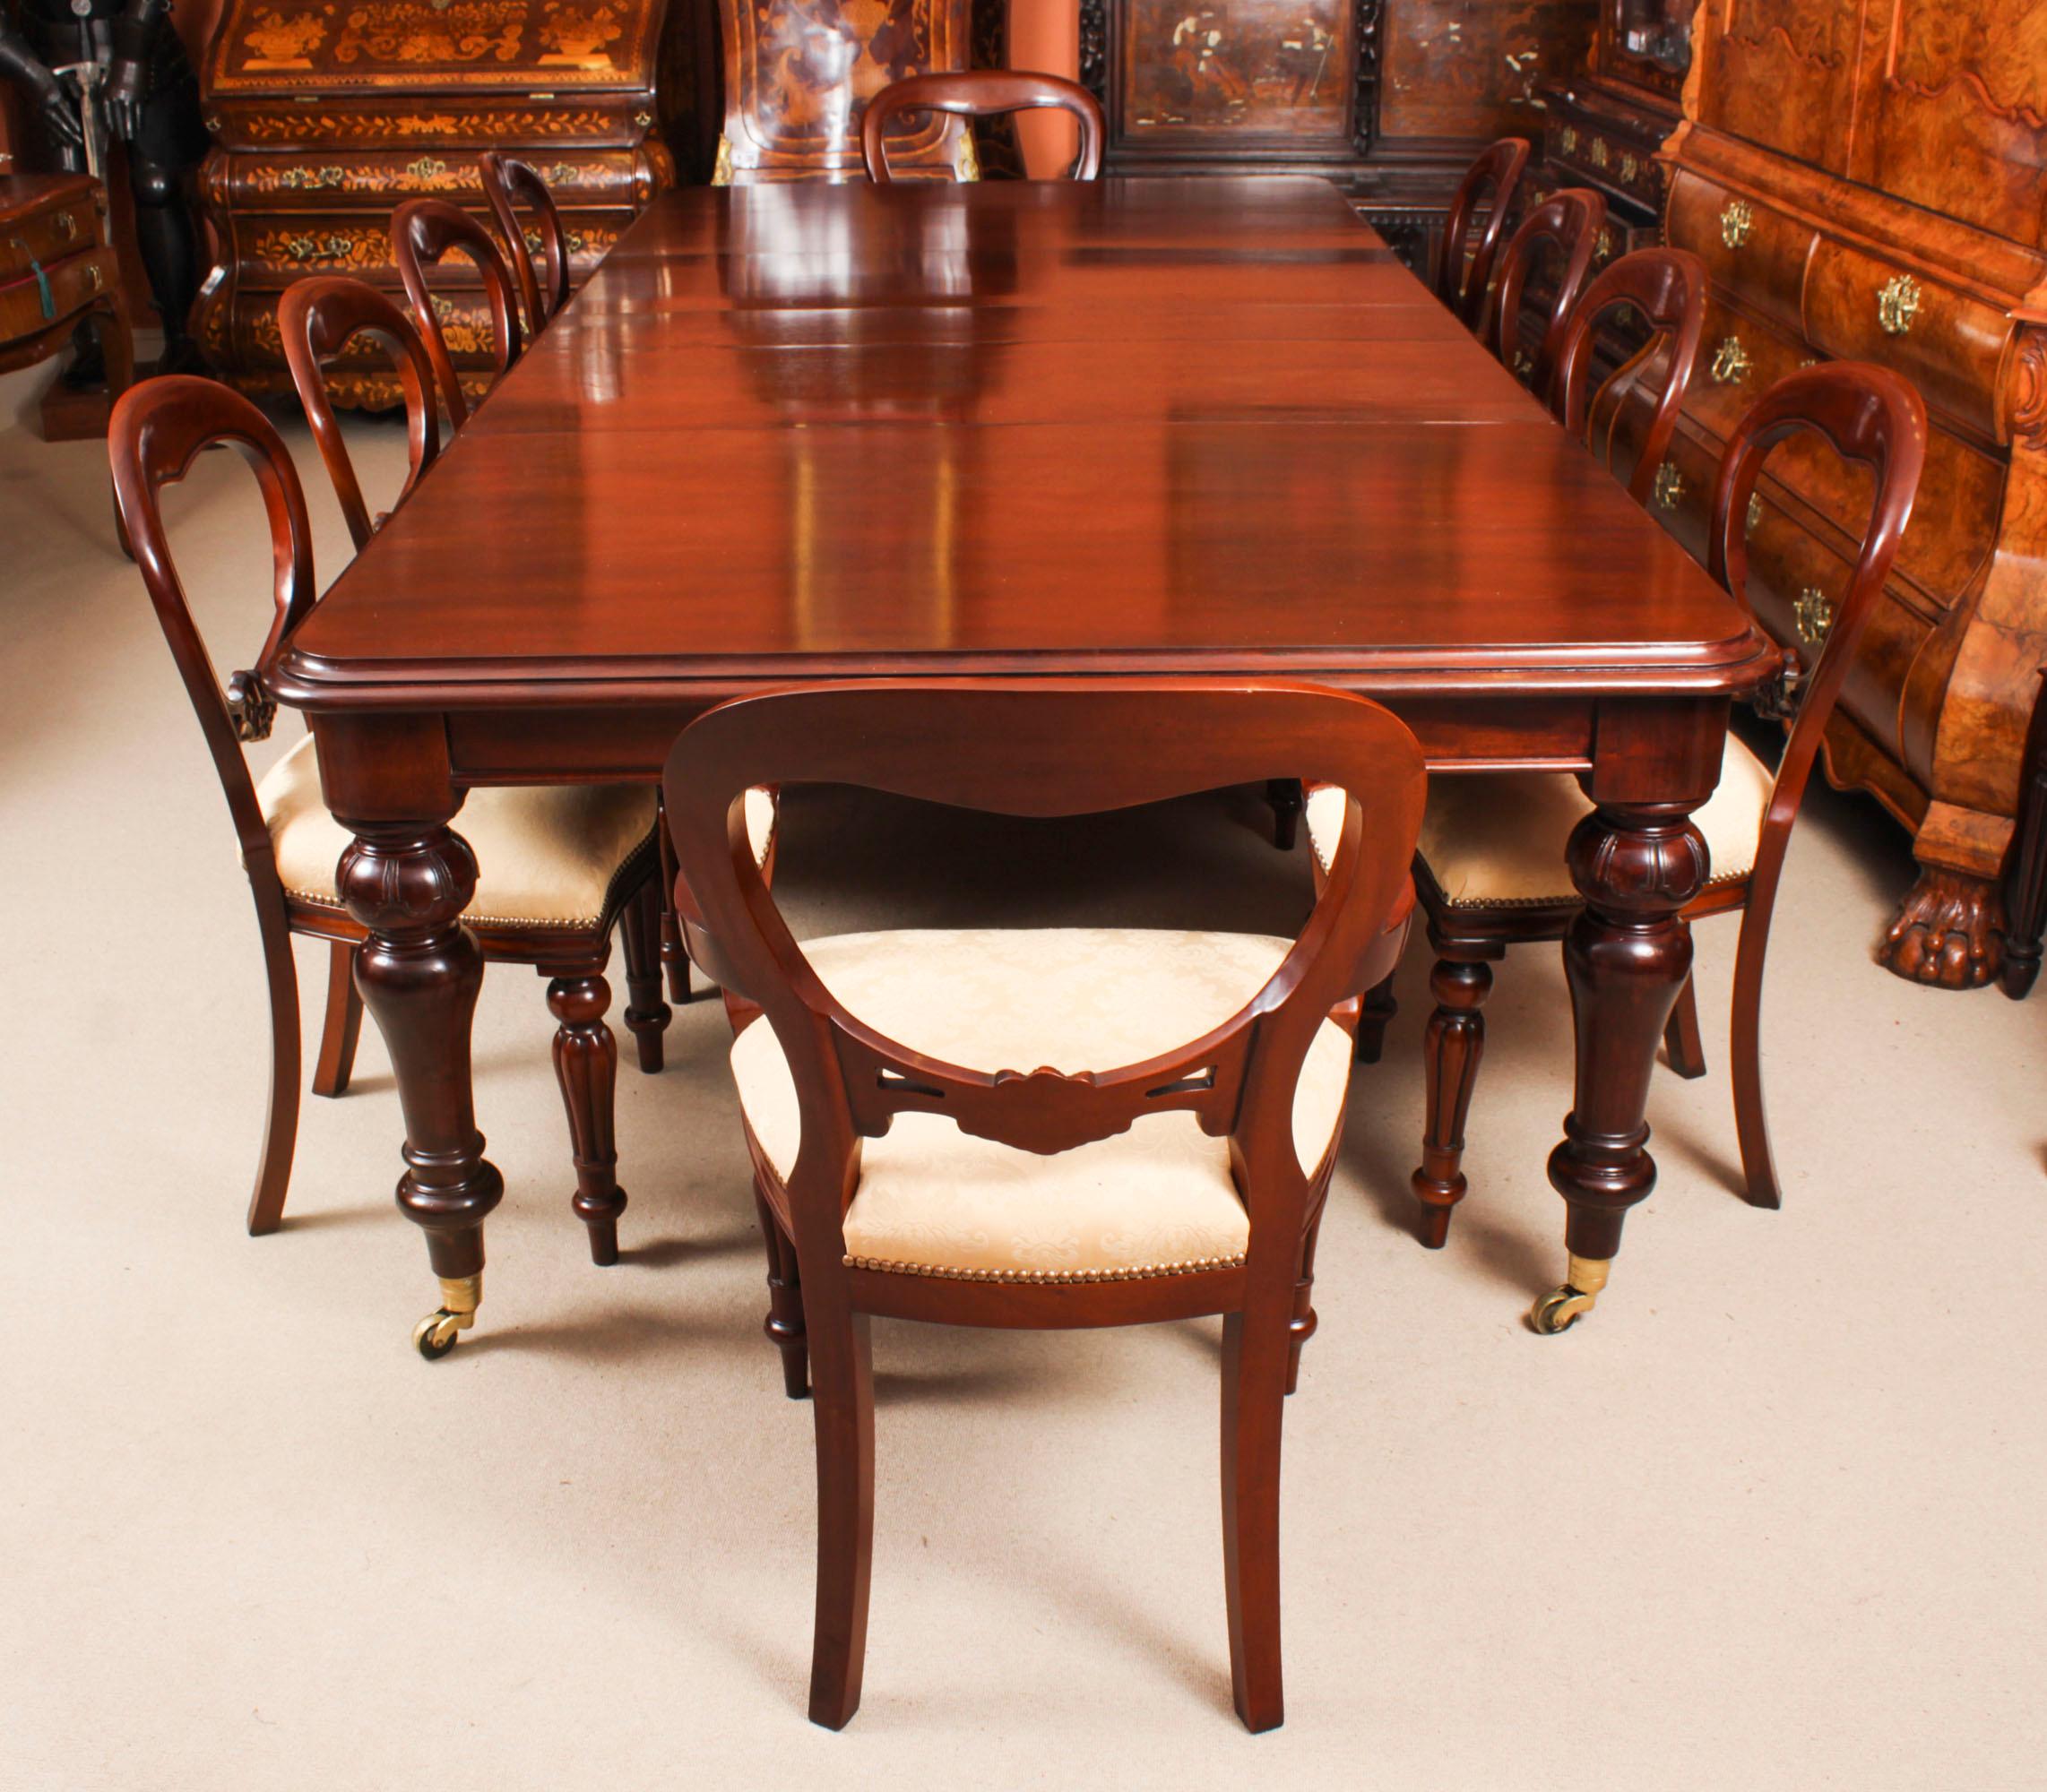 This is a fantastic  dining set comprising of an antique William IV dining table, C1835 in date,  with a set of ten balloon back  dining chairs, dating from the last quarter of the 20th century. 

The magnificent antique William IV solid mahogany